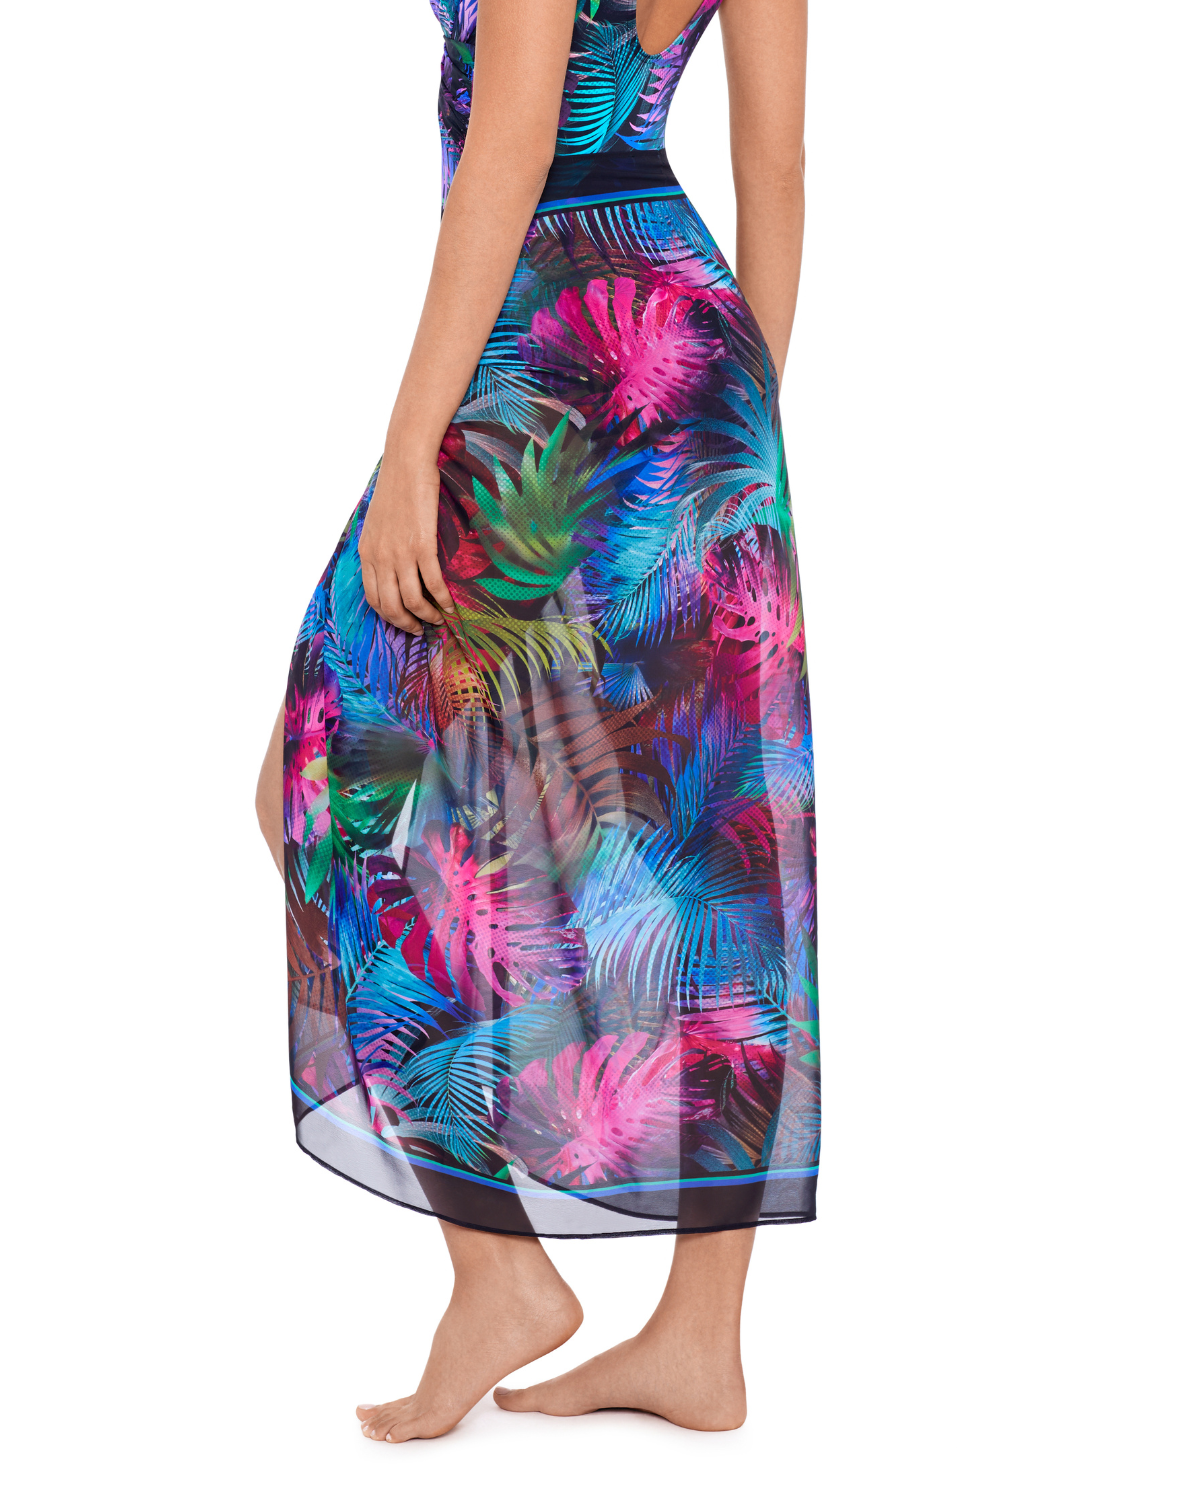 A model wearing a cover up pareo in a pink, green, blue, and black palm frond print